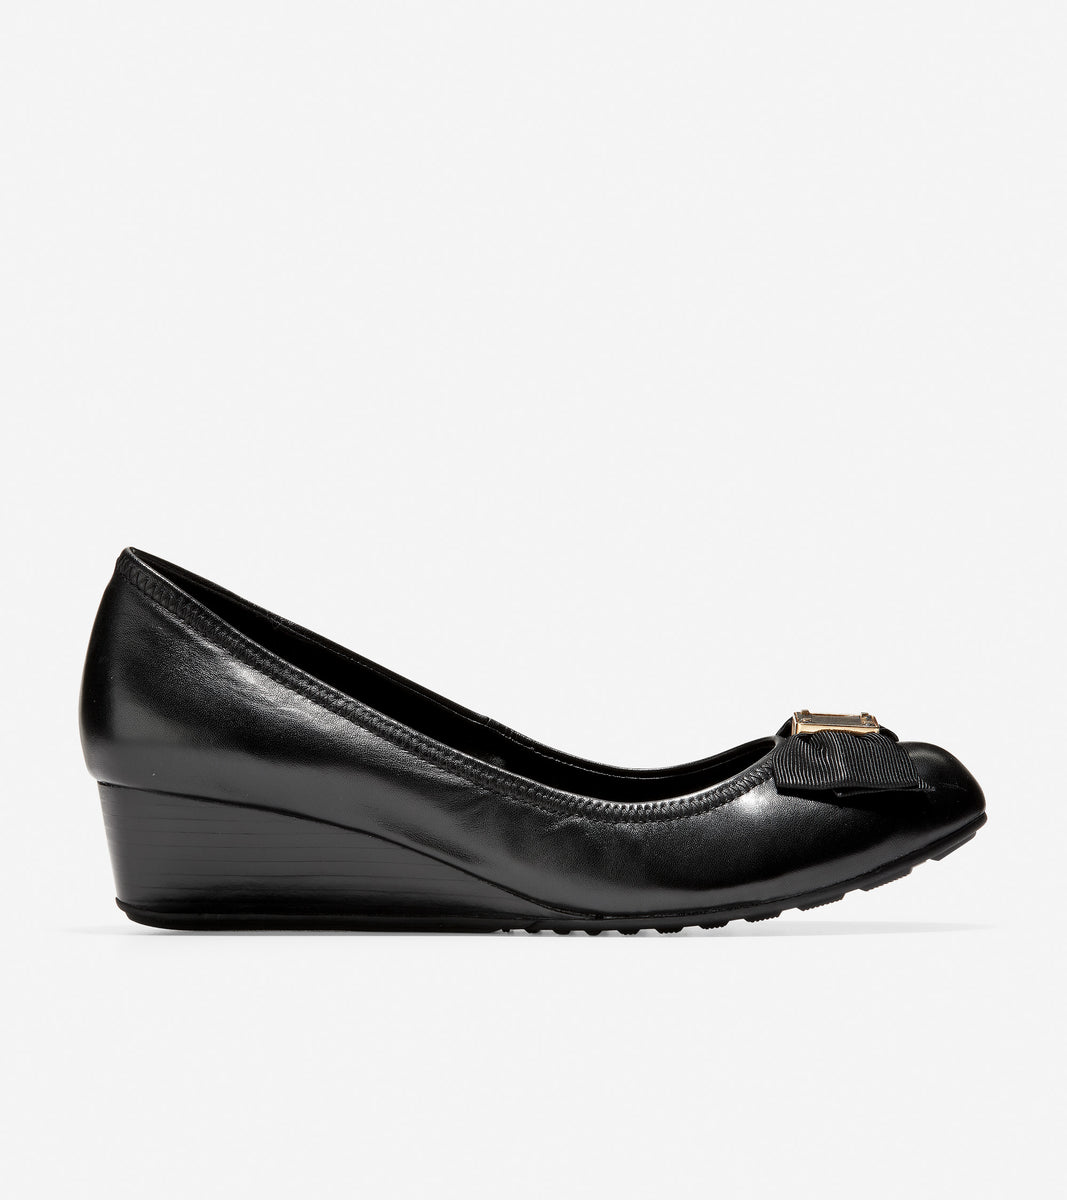 ColeHaan-Tali Soft Bow Wedge-w11798-Black Leather